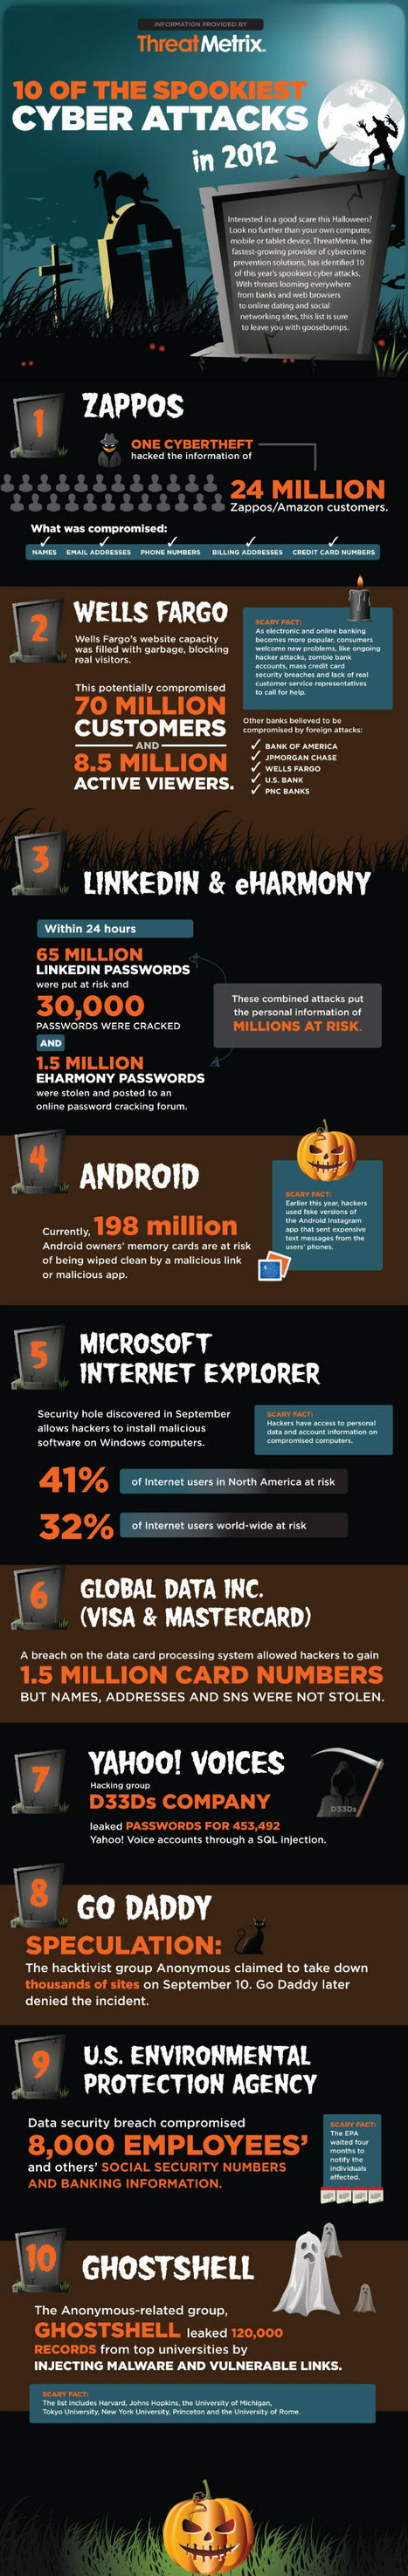 10 Spooky Cyberattacks in 2012 [INFOGRAPHIC] | 21st Century Learning and Teaching | Scoop.it